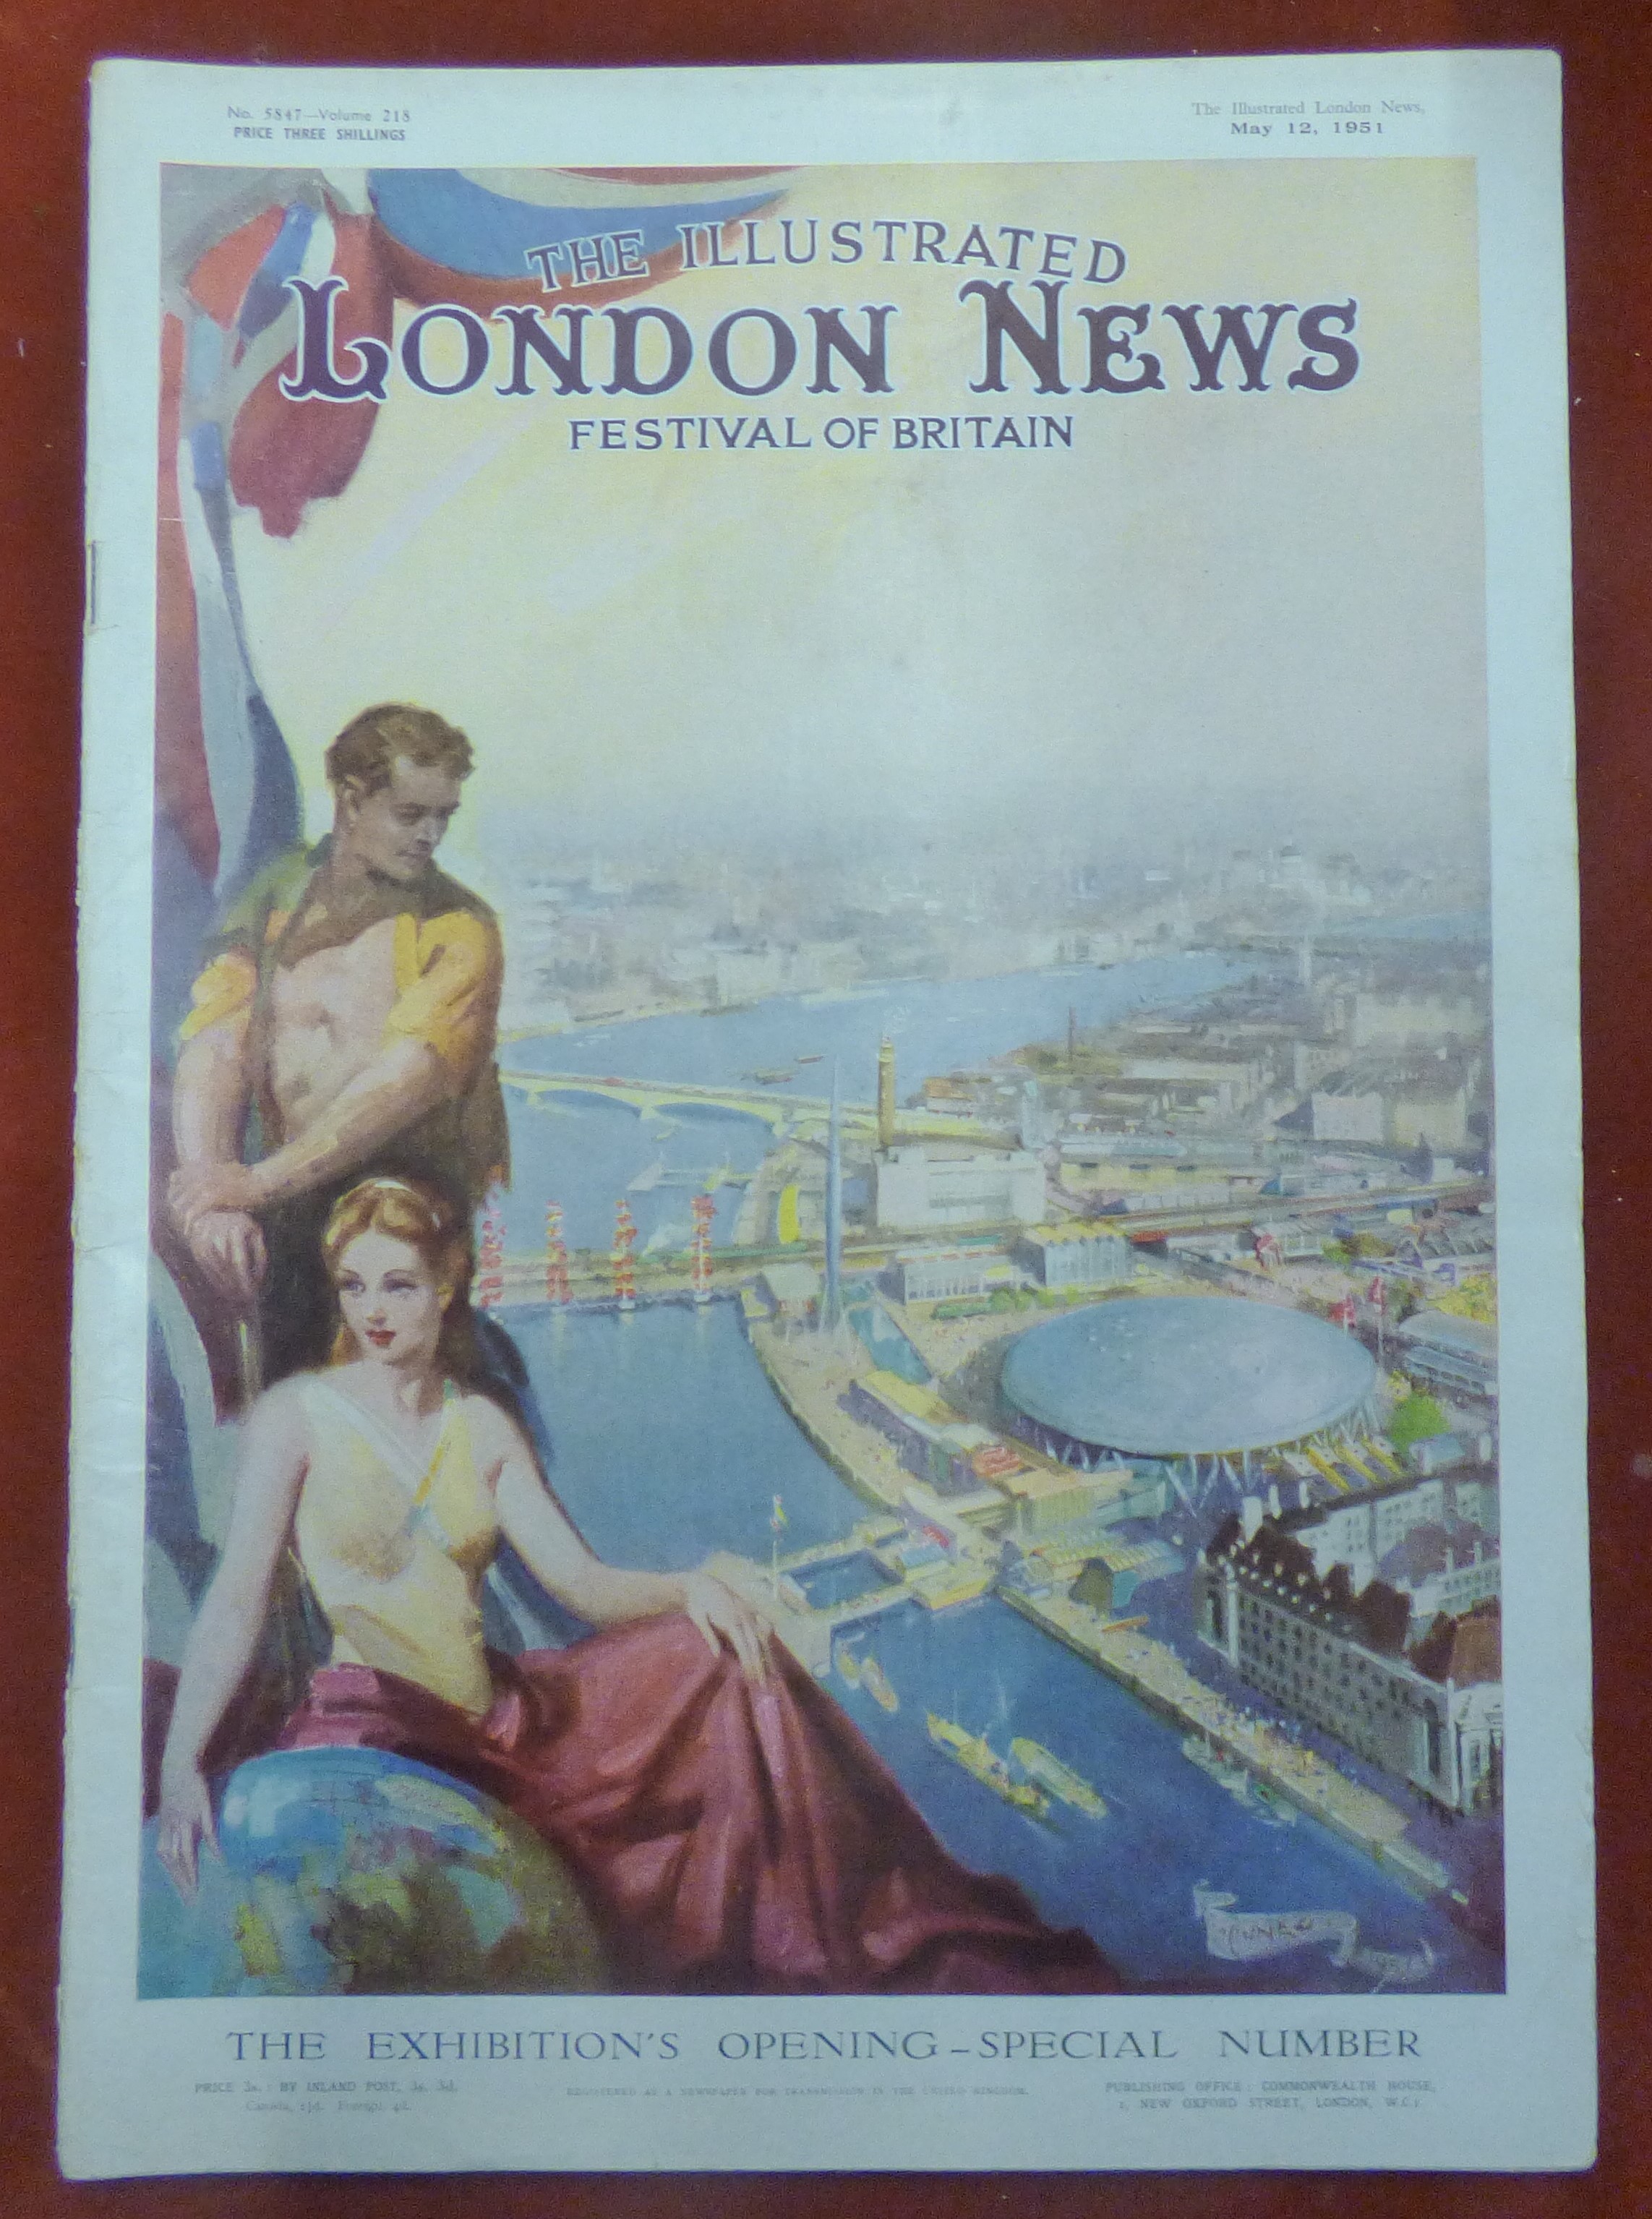 1951 Festival of Britain - London Illustrated News, The Exhibition's opening - Special Number, May